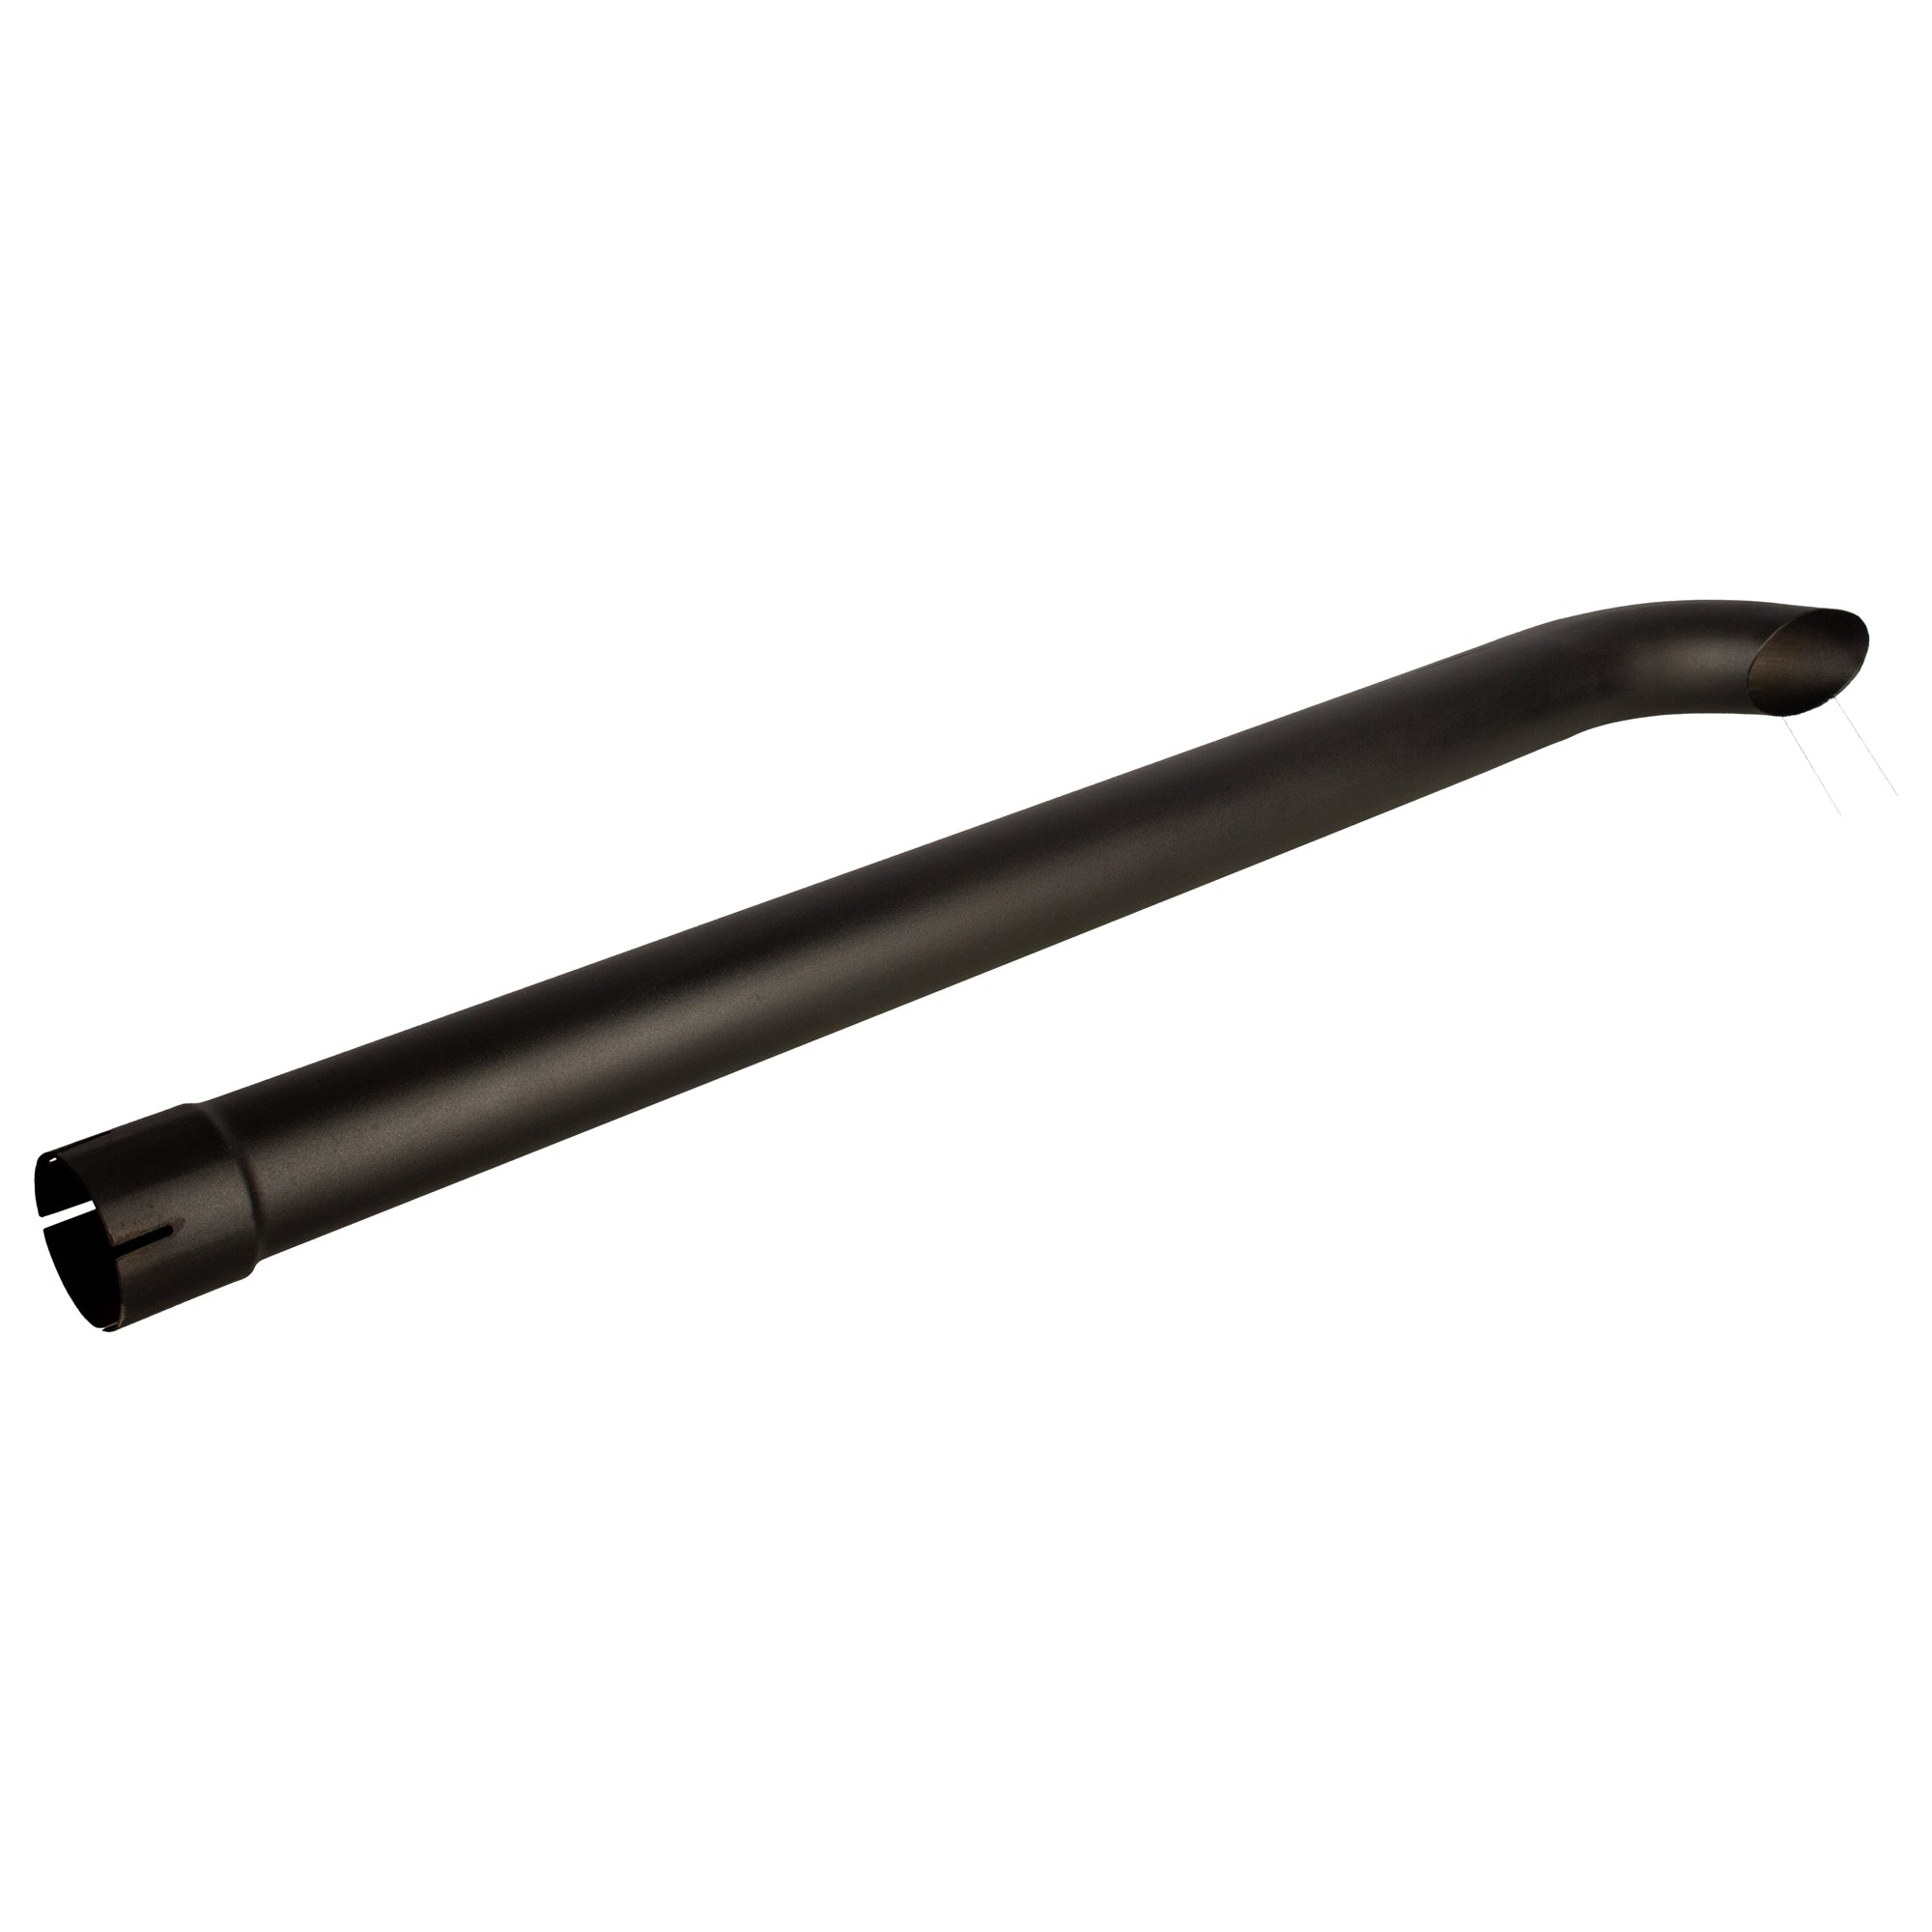 Exhaust Stack Pipe Replacement for Universal - 3-3/16" x 48", Curved Black